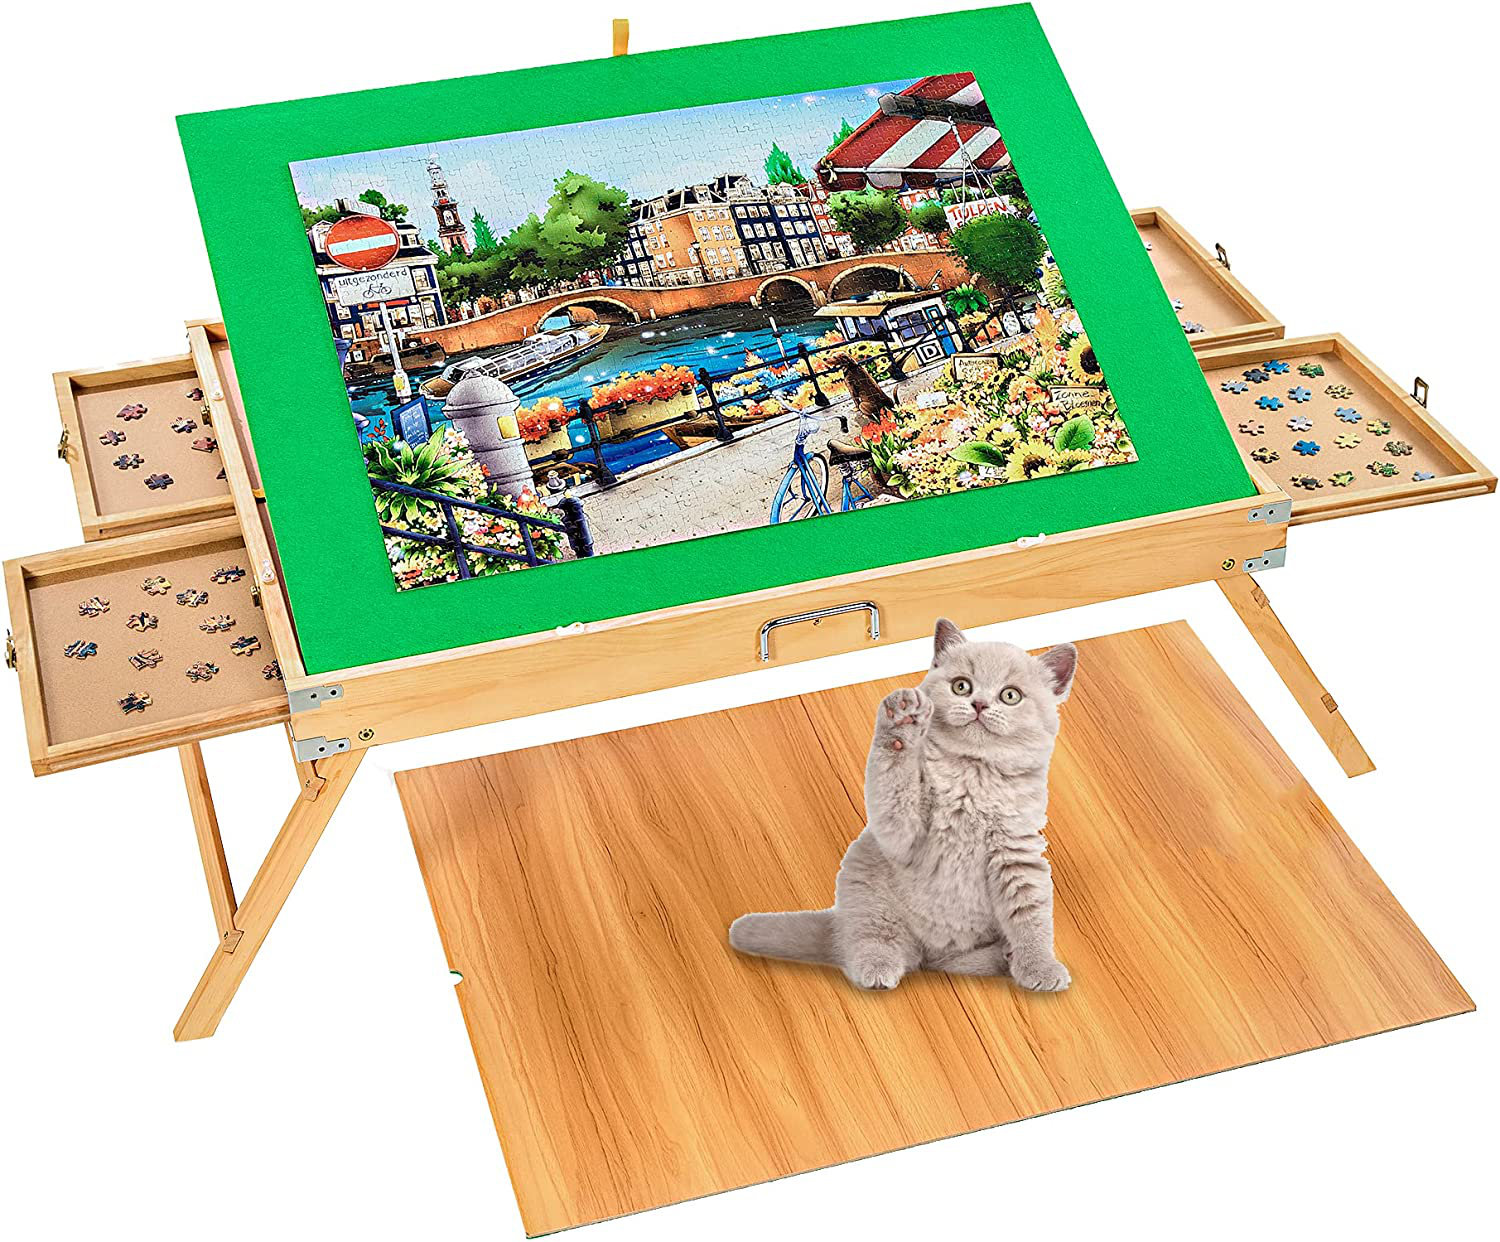 Puzzle Board Table 1500 1000 Piece Tilting with Drawers and Non Slip Board  Portable 34x26 Puzzle Table with Wooden Cover Adjustable Sorting Storage